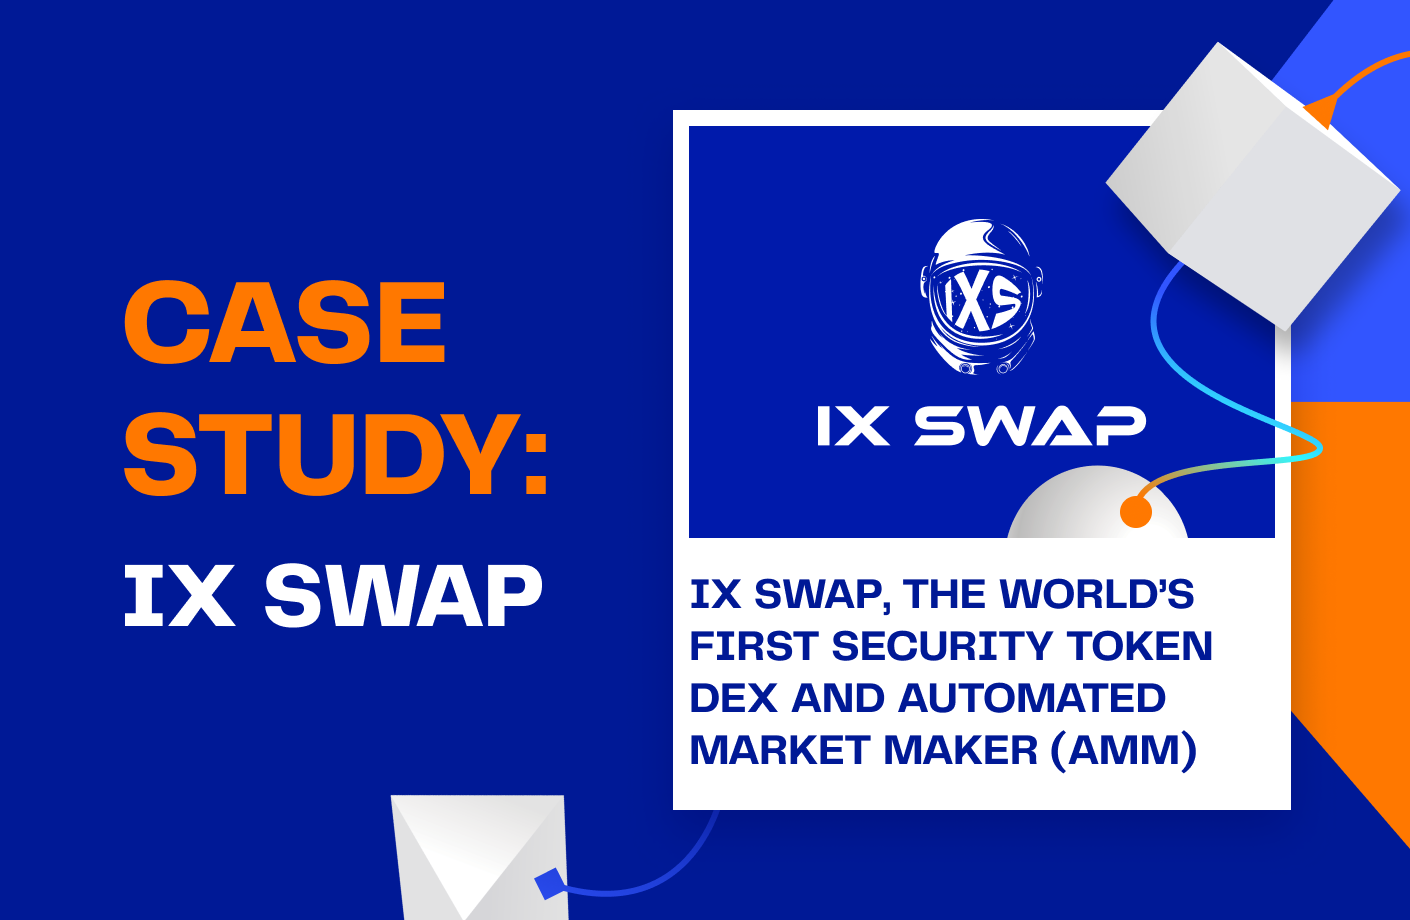 This image shows IX Swap, The World’s First Security Token DEX and Automated Market Maker